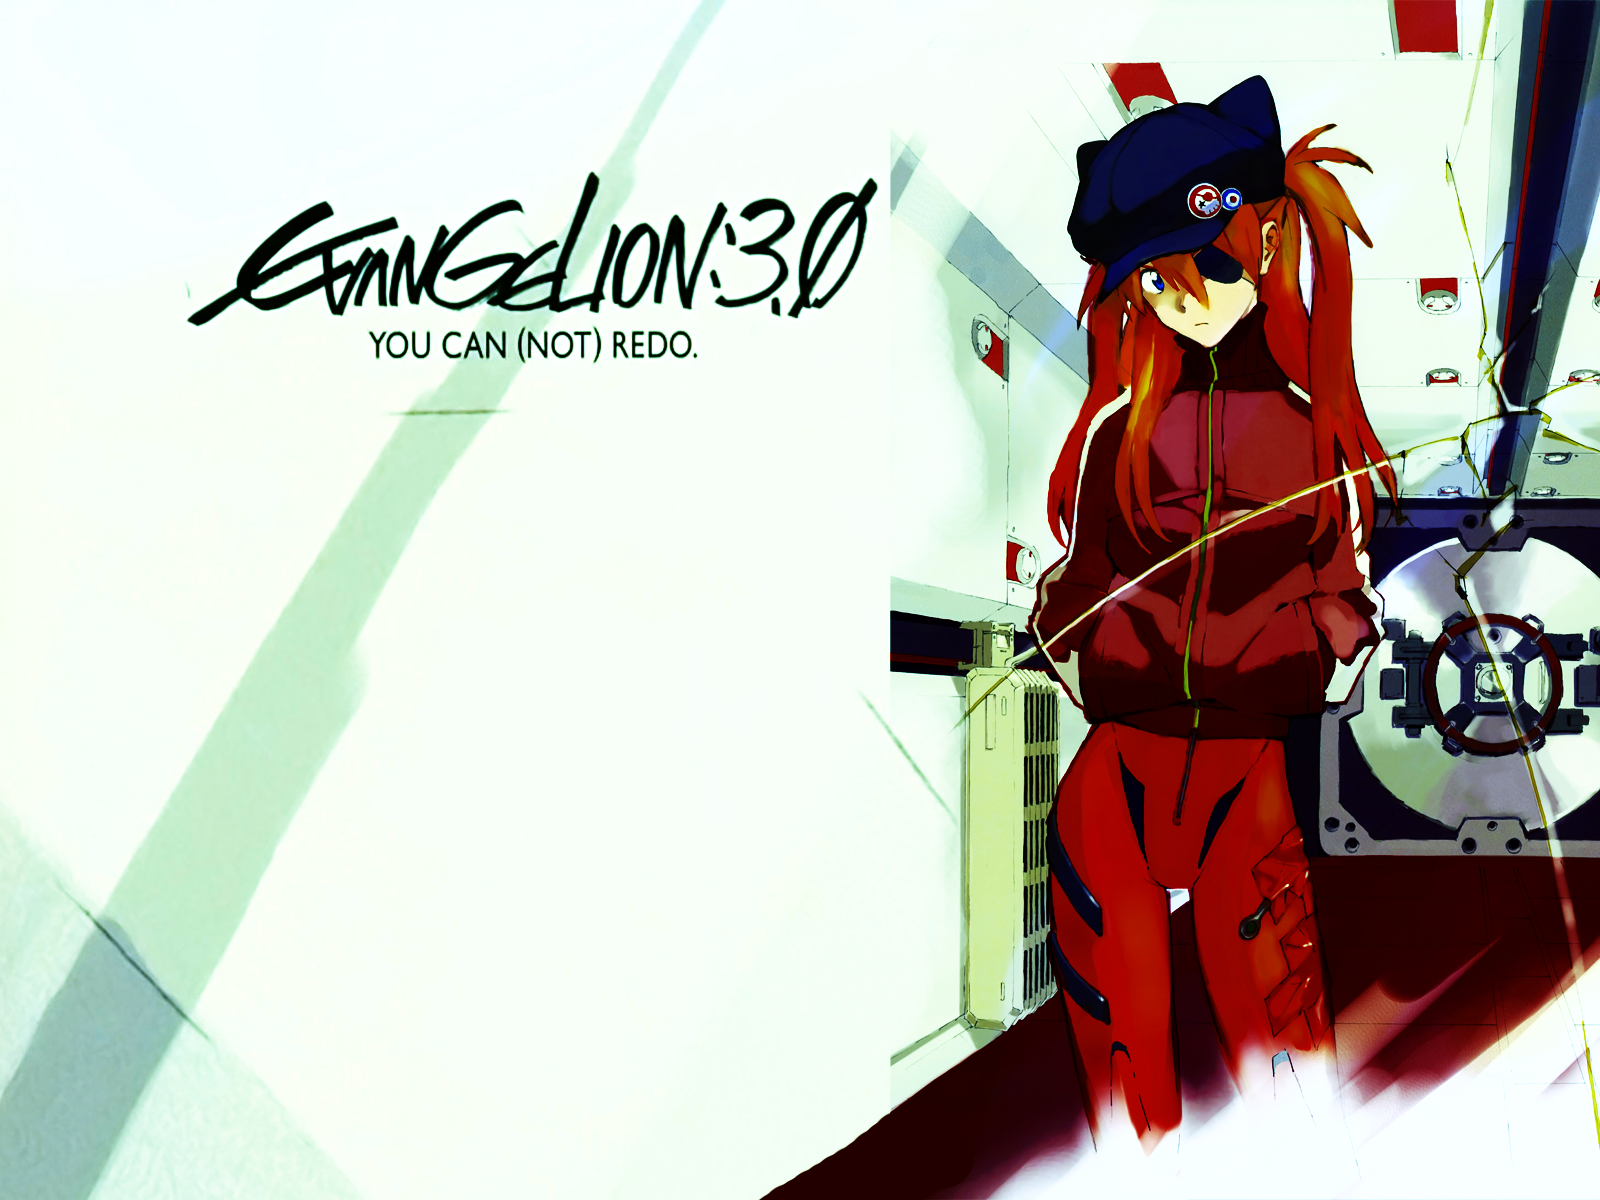 Anime Evangelion: 3.0 You Can (Not) Redo Art